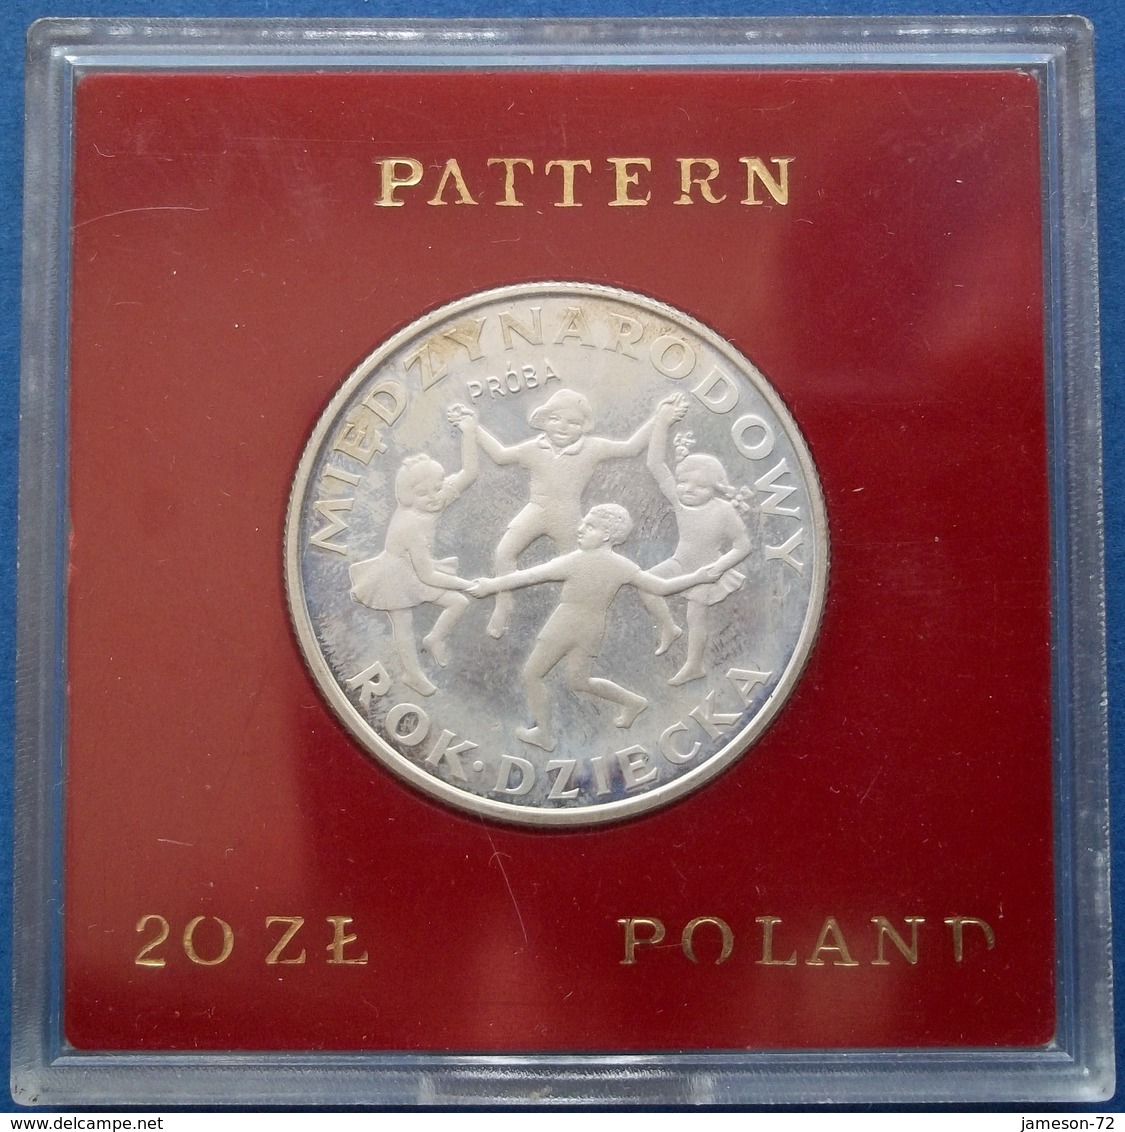 POLAND - 20 Zlotych 1979 "Int. Year Of The Child" Y# 99 In Box - Edelweiss Coins - Poland